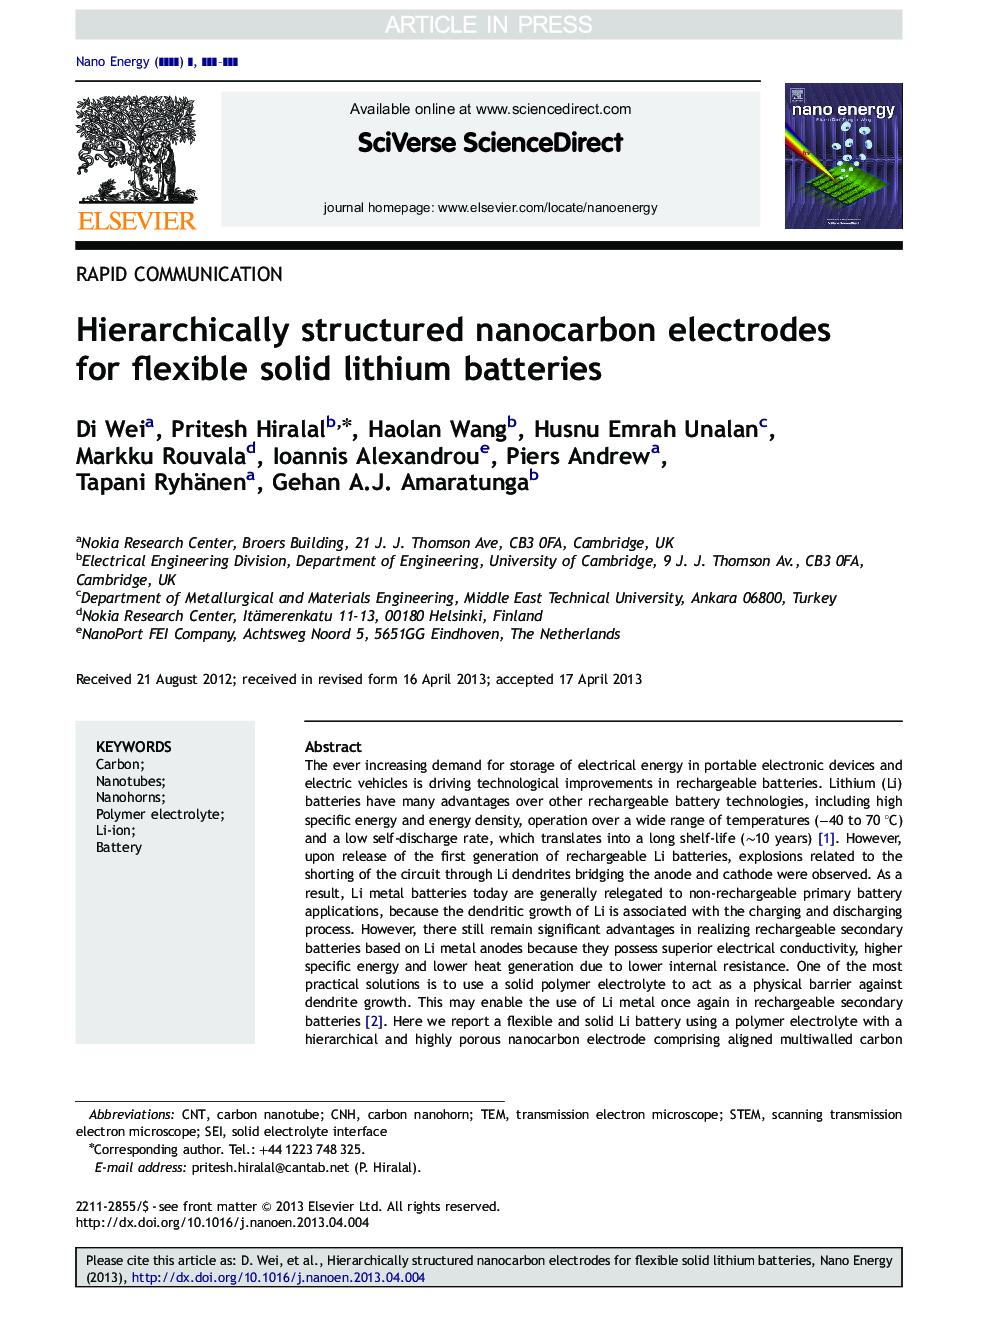 Hierarchically structured nanocarbon electrodes for flexible solid lithium batteries